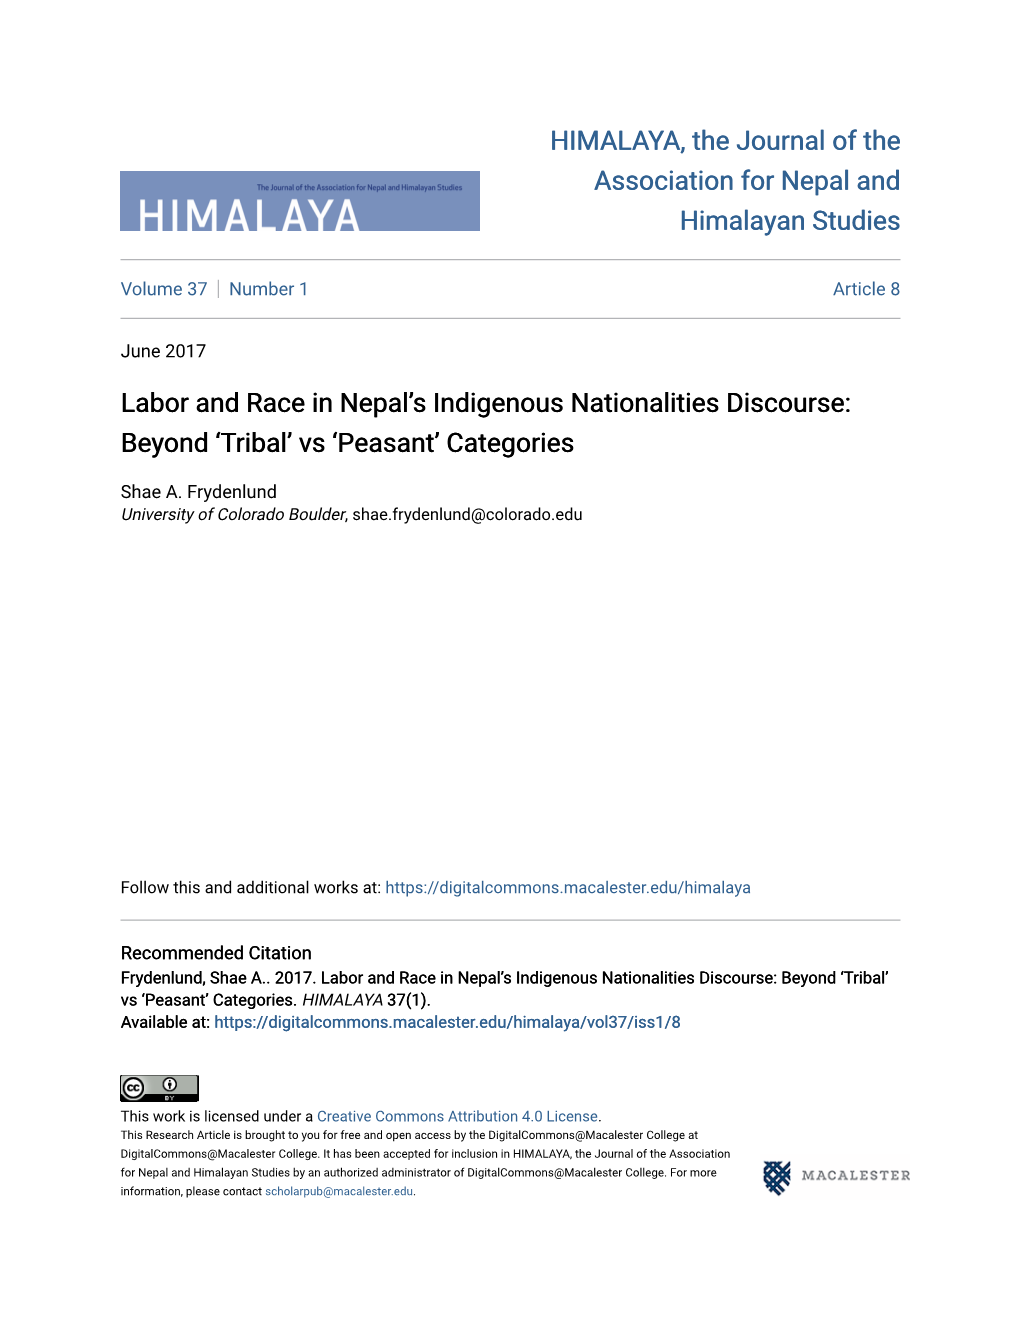 Labor and Race in Nepal's Indigenous Nationalities Discourse: Beyond